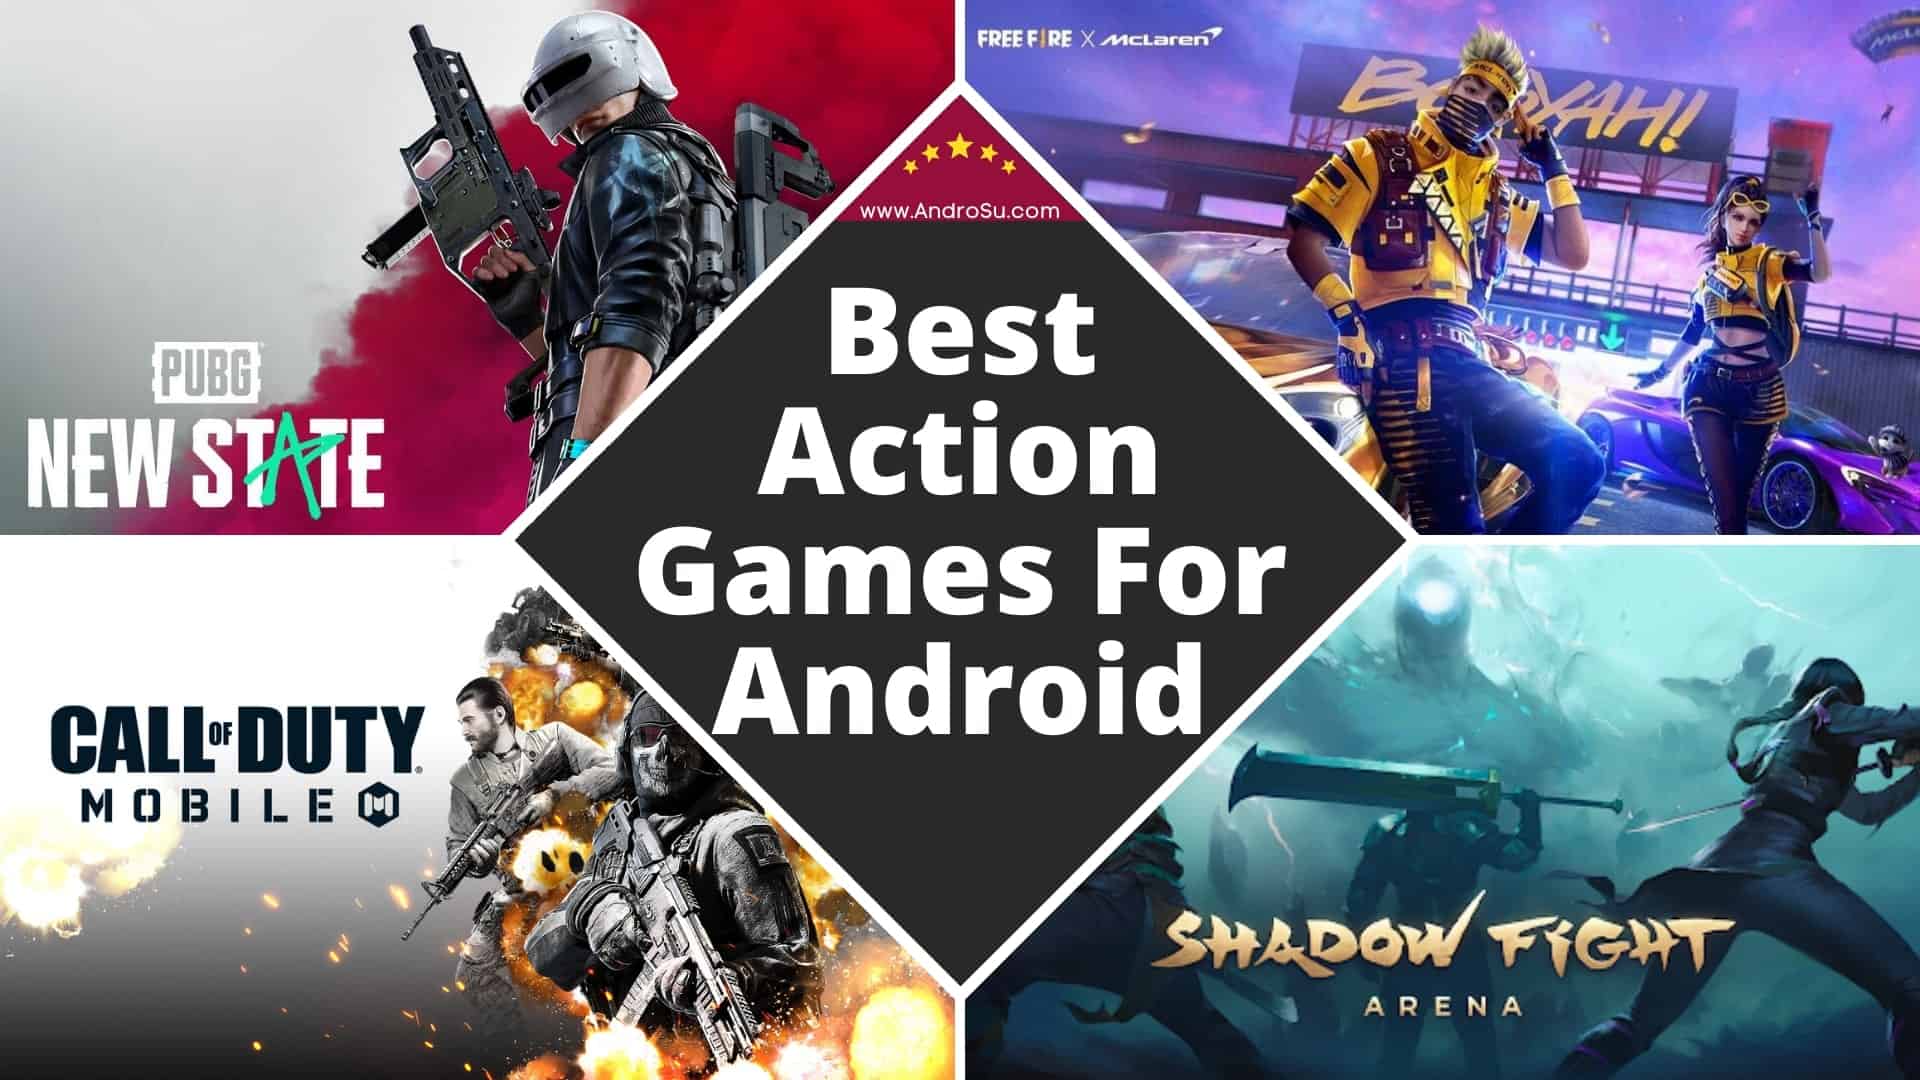 Top 6 Mobile Games – Best Graphics & Storyline